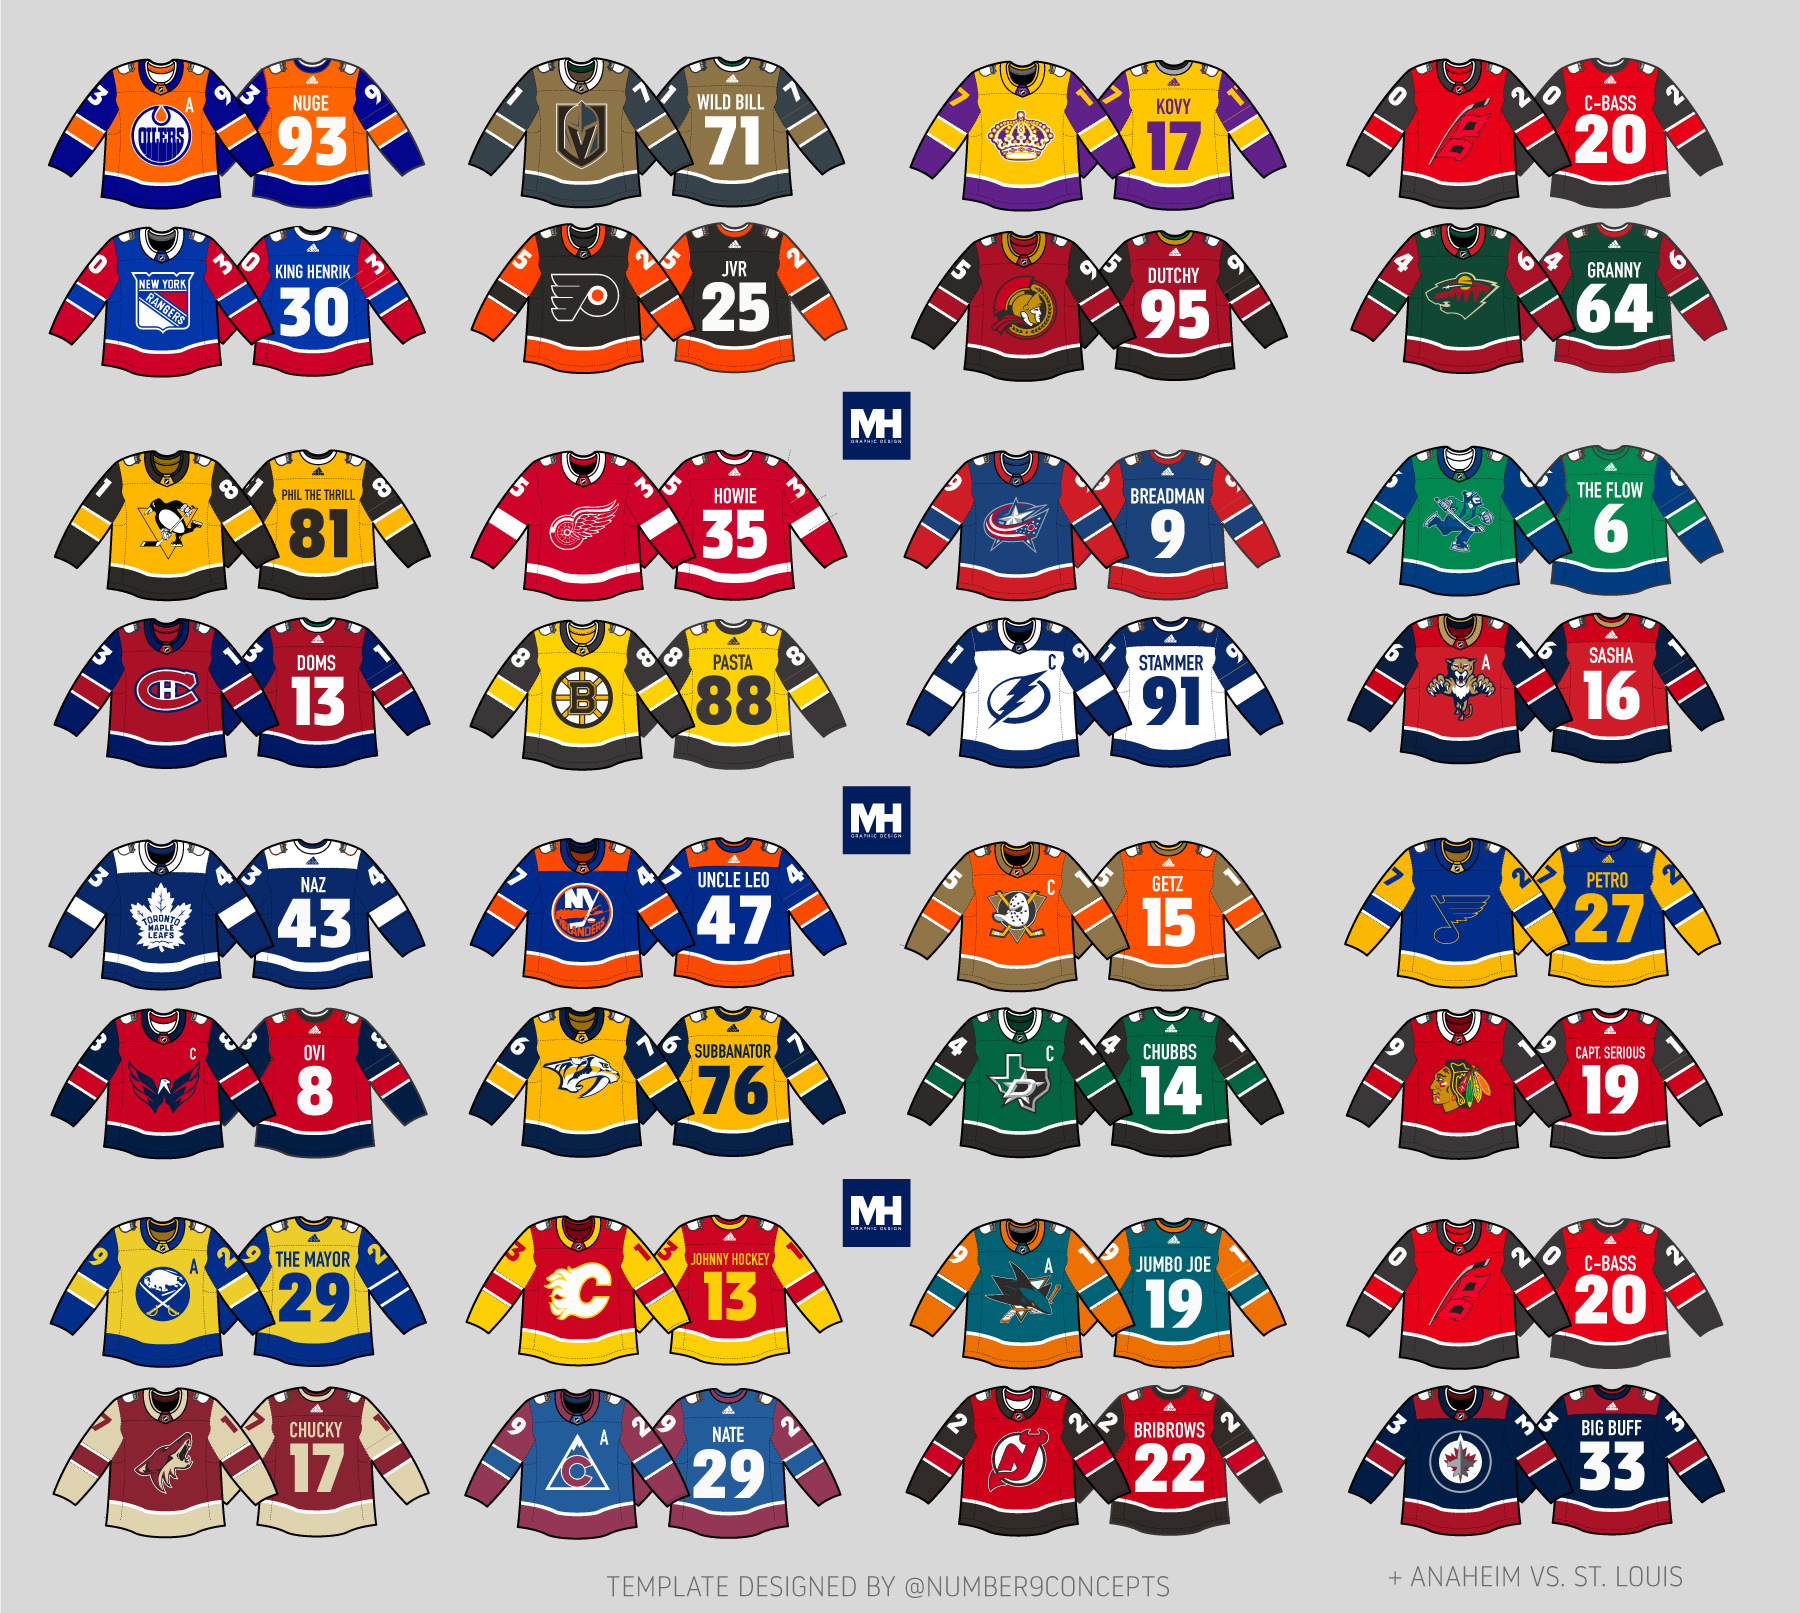 NHL Players Weekend: Take Two 